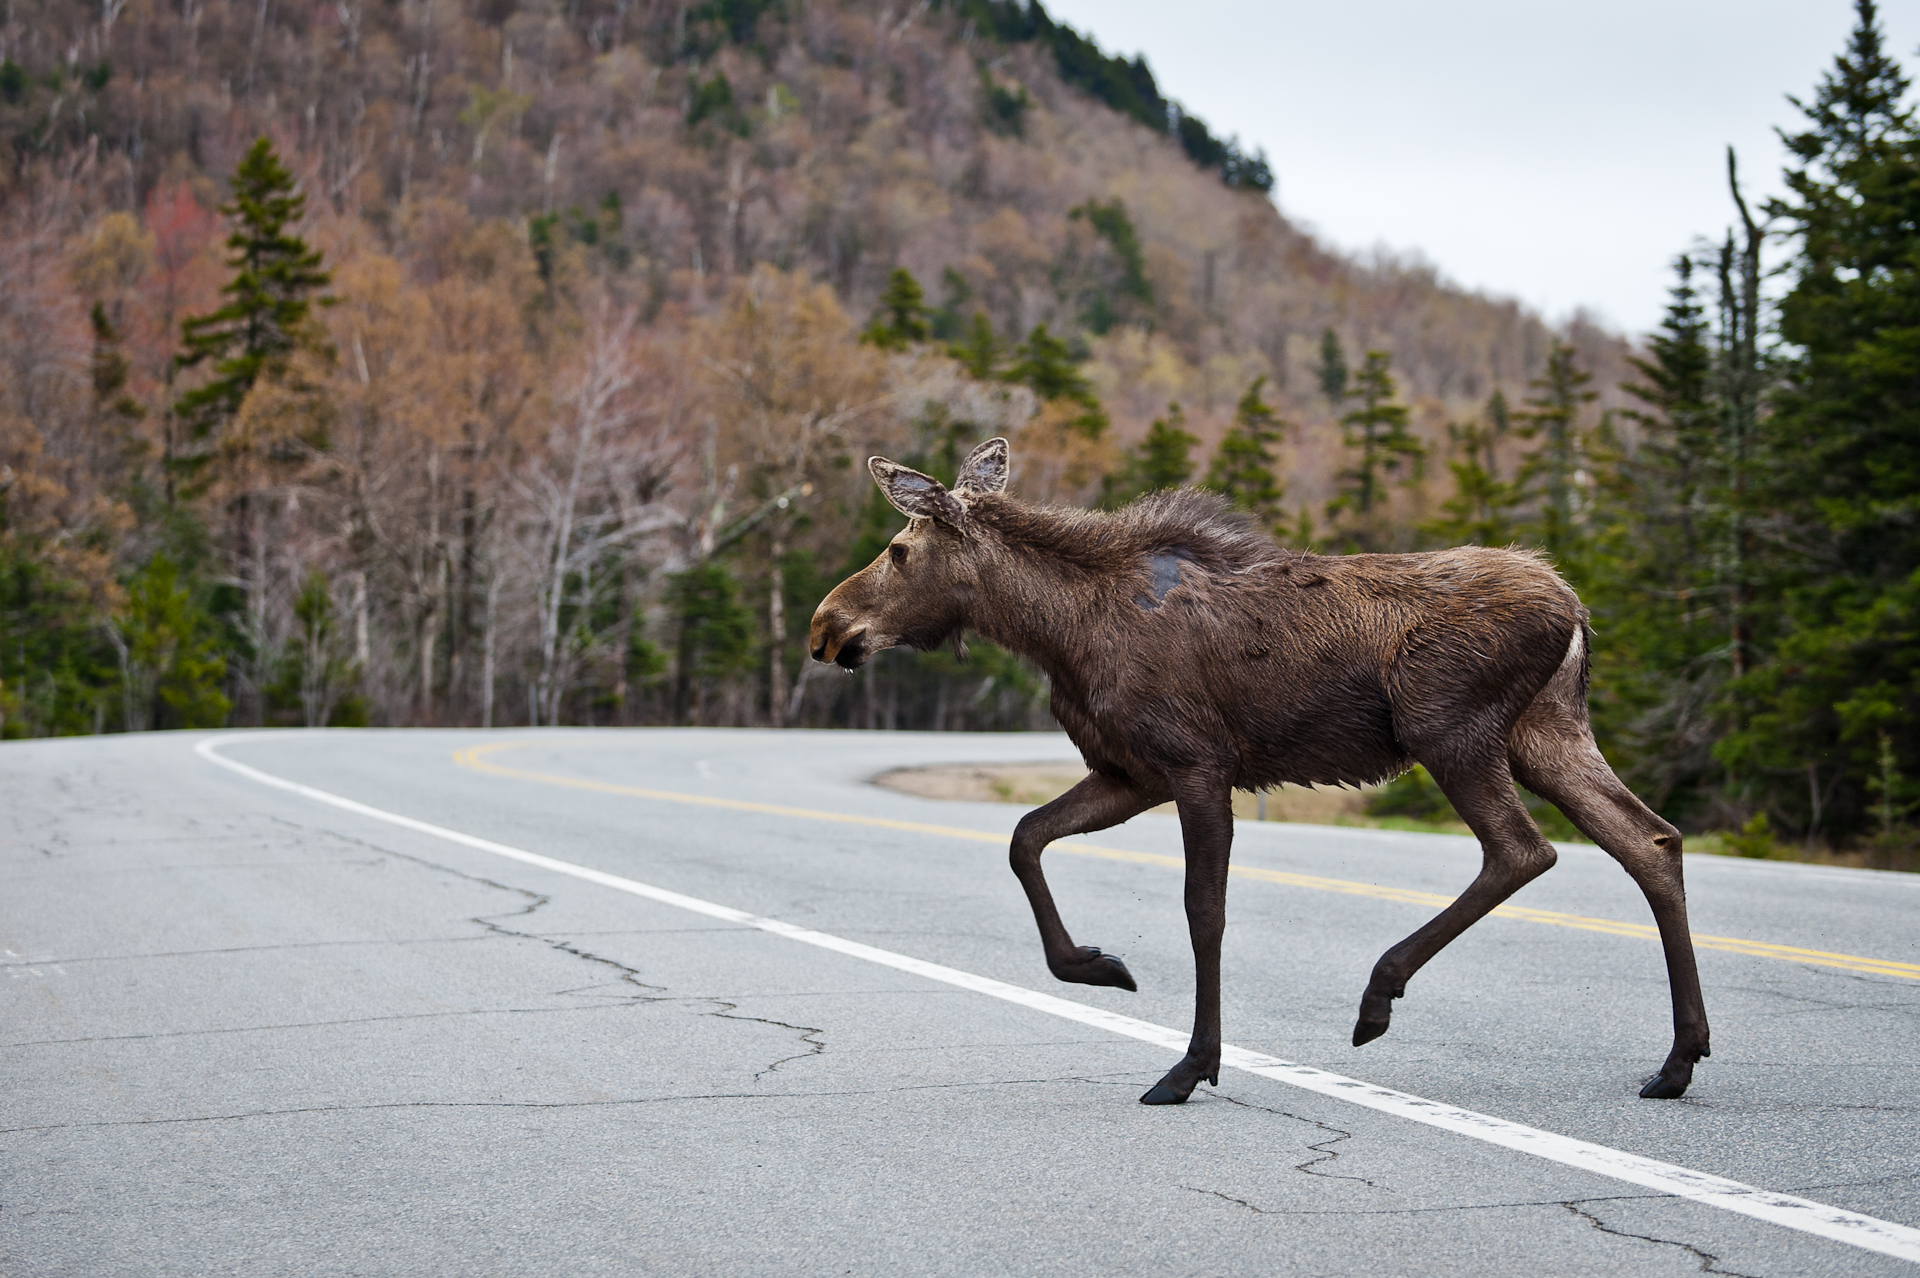 Moose Heading Up The Mountain (user submitted)